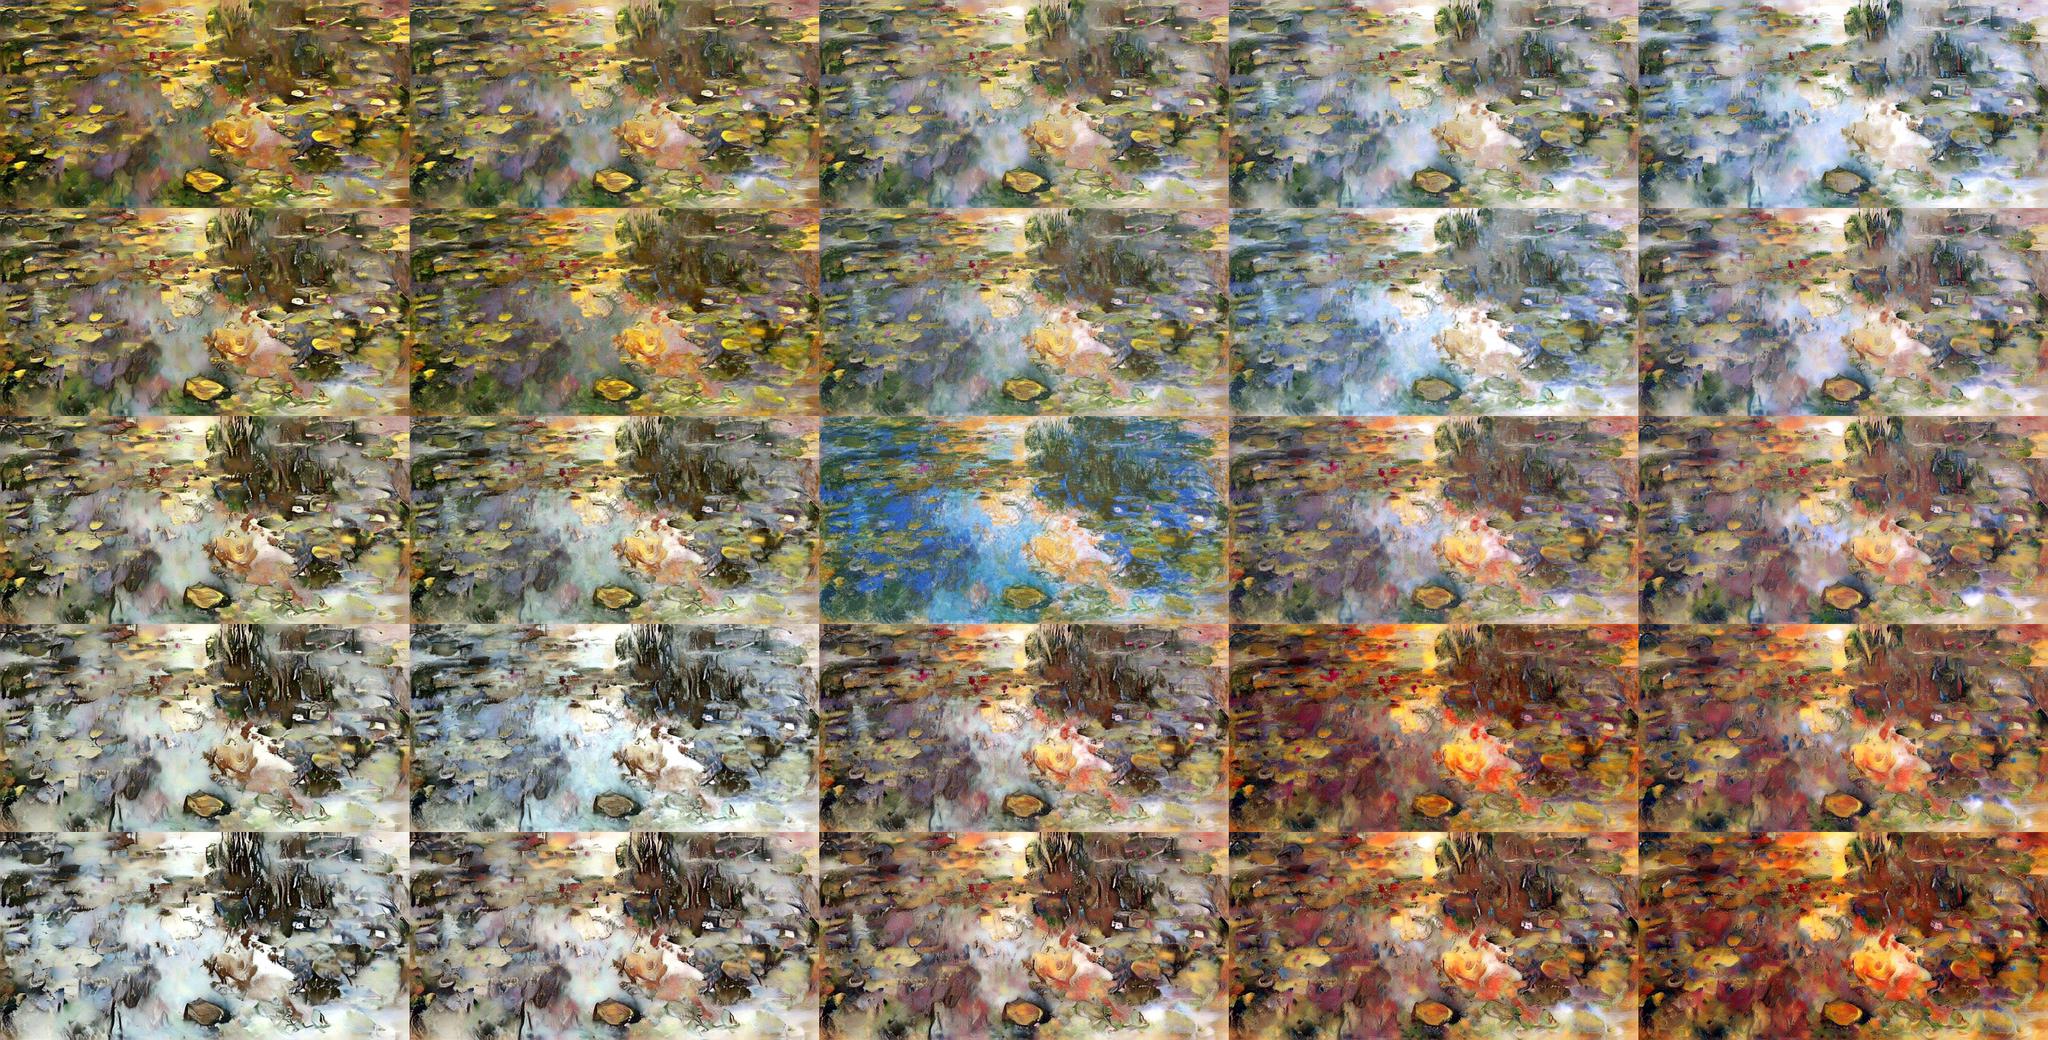 /images/neurips18/monet/grids/freestyle_1272.jpg